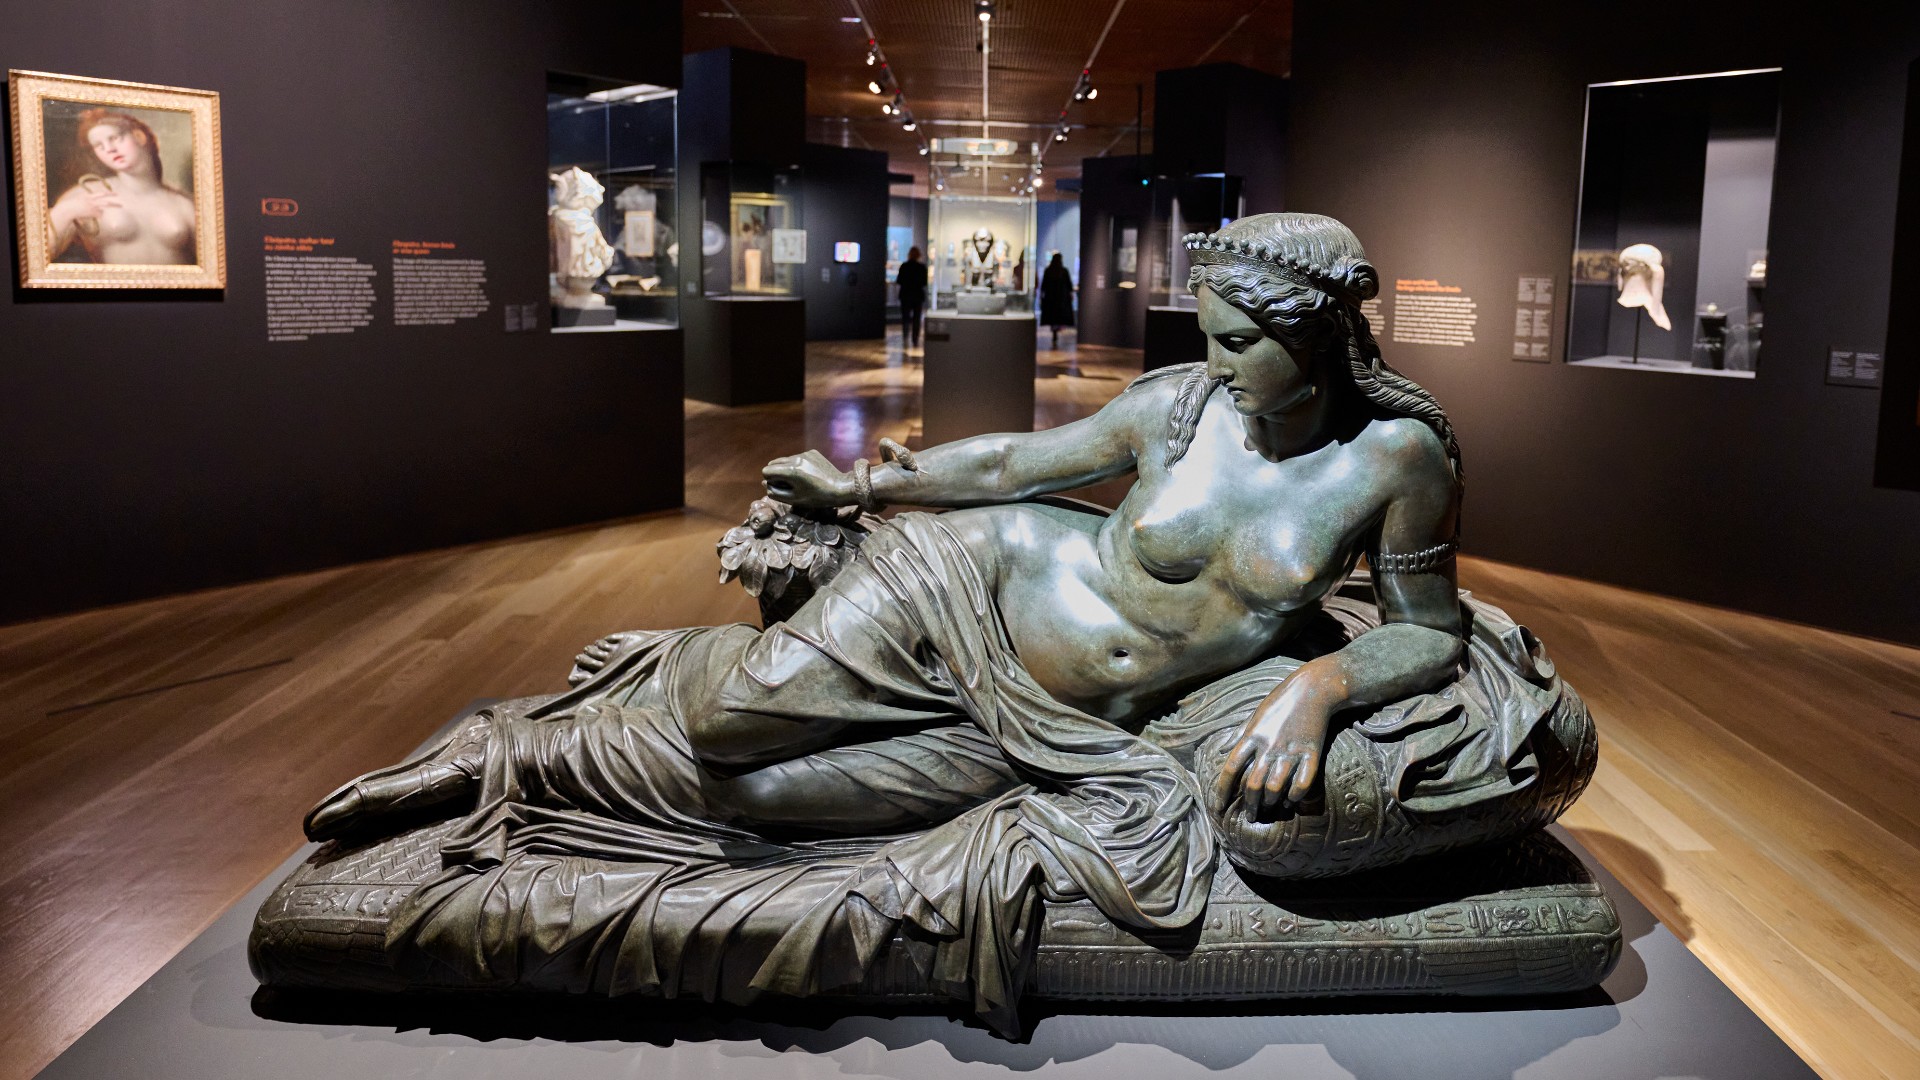 Cleopatra's statue with Asp snake seen on display during a press visit to "Pharaohs Superstars" in Gulbenkian Foundation on November 24, 2022, in Lisbon, Portugal. Here we see a nude woman, with a sheet wrapped around her legs and an Asp snaking up her arm.